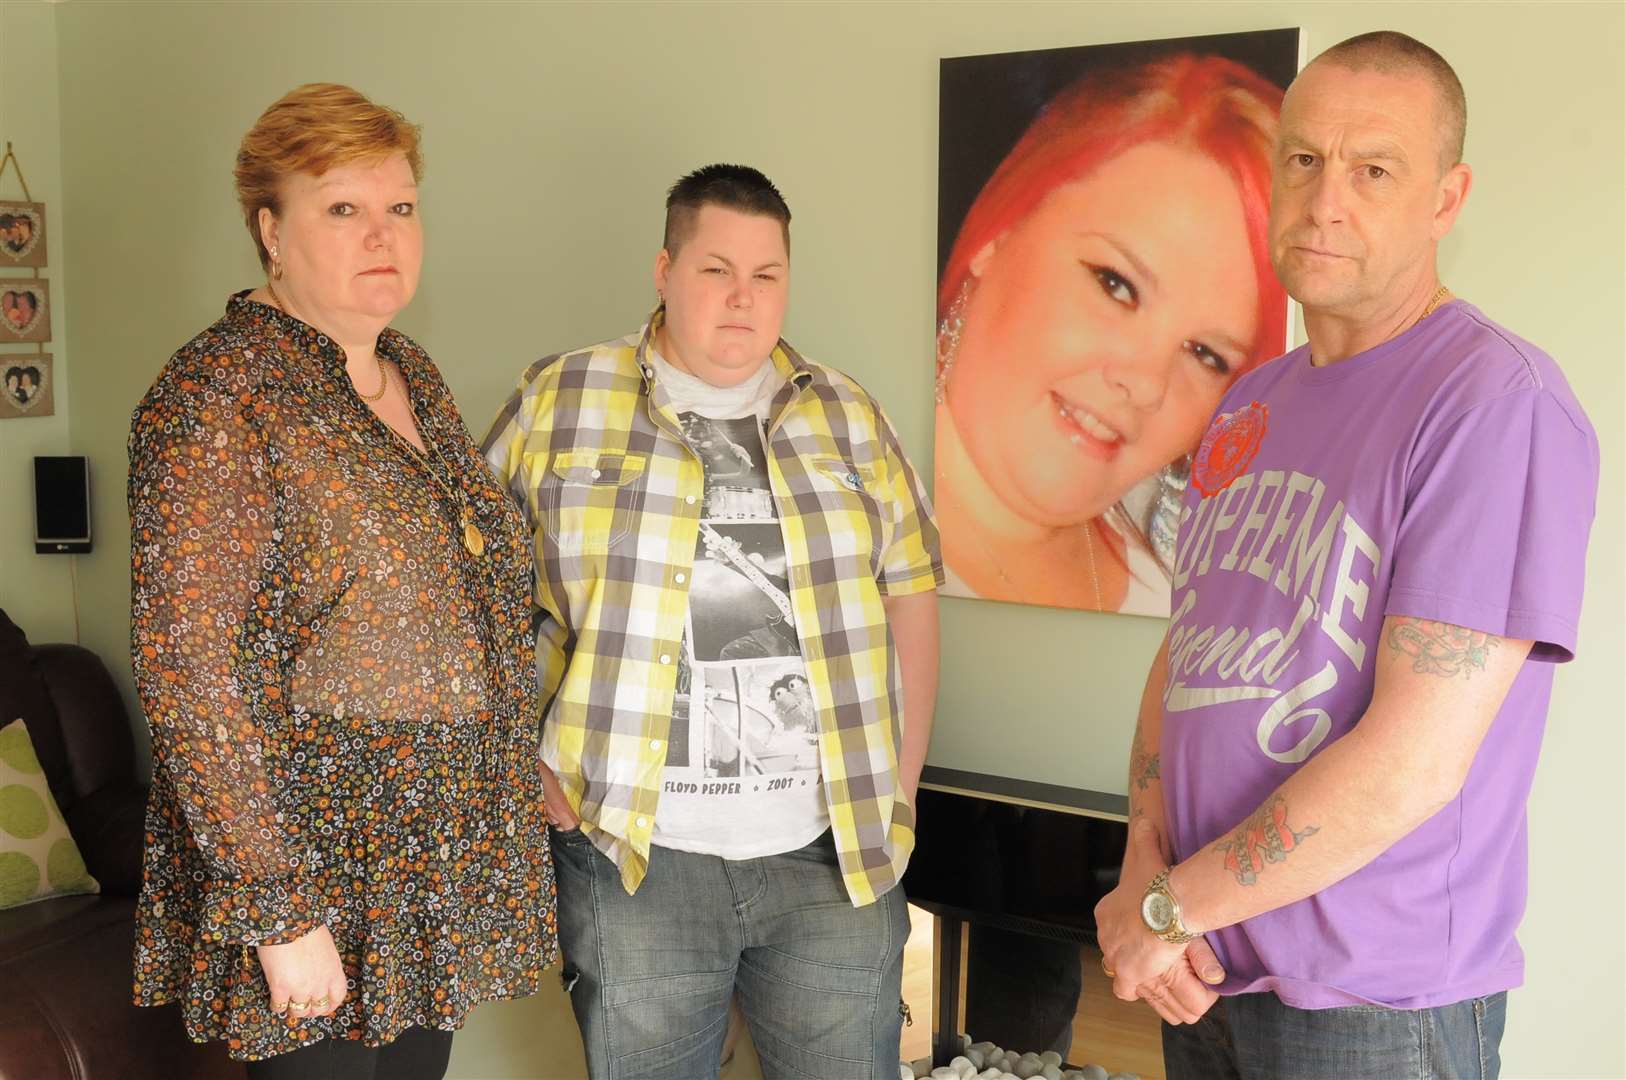 Adele Jarvis (left) with daughter Gemma and husband Mark, standing in front of a picture of Natalie Jarvis, her daughter who was killed in 2013